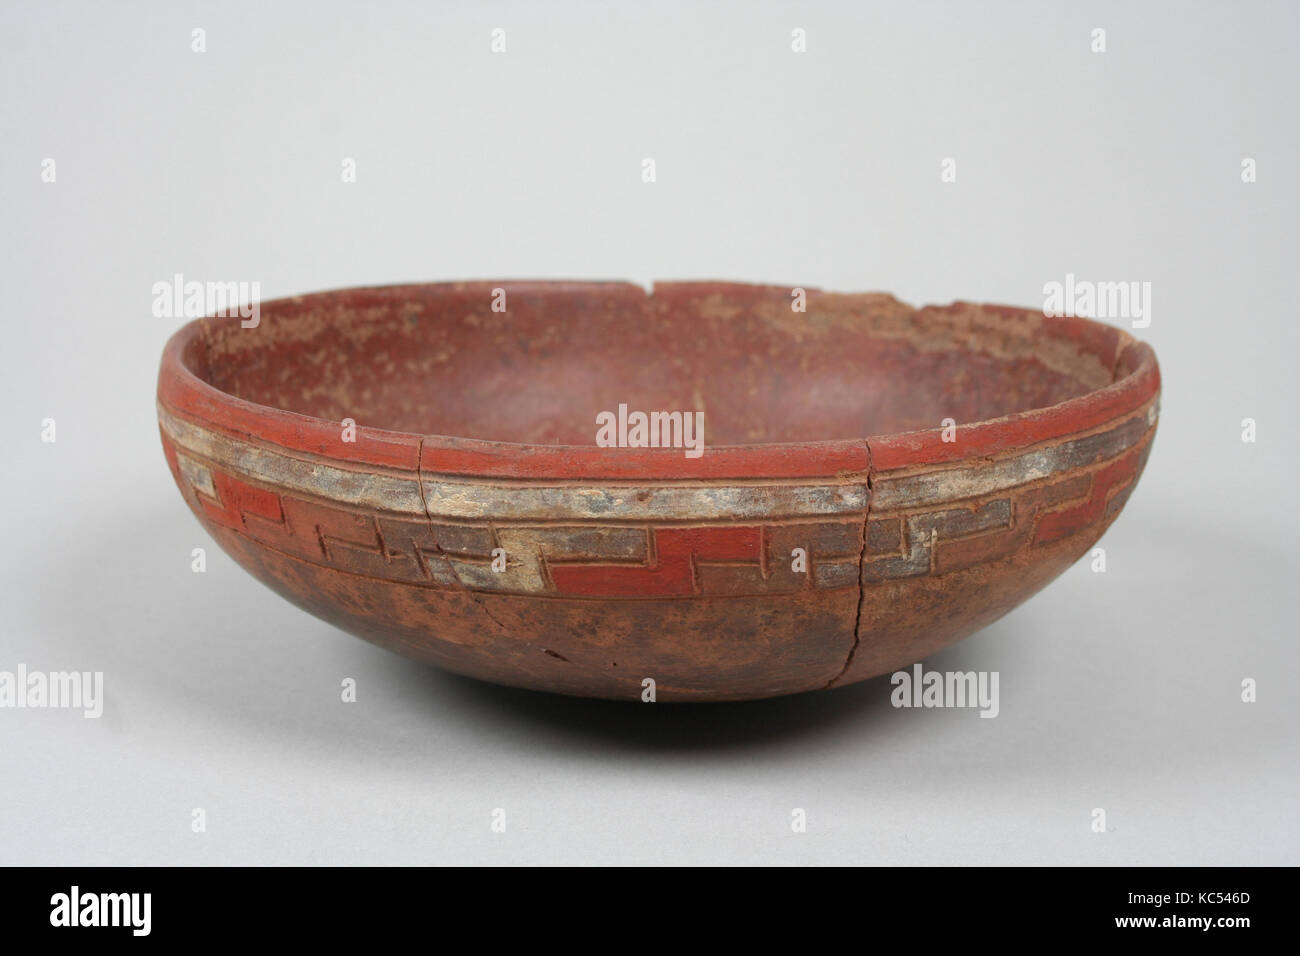 Incised bowl with dots, 7th–5th century B.C., Peru, Paracas, Ceramic, pigment, Overall: 2 in. (5.08 cm), Ceramics-Containers Stock Photo